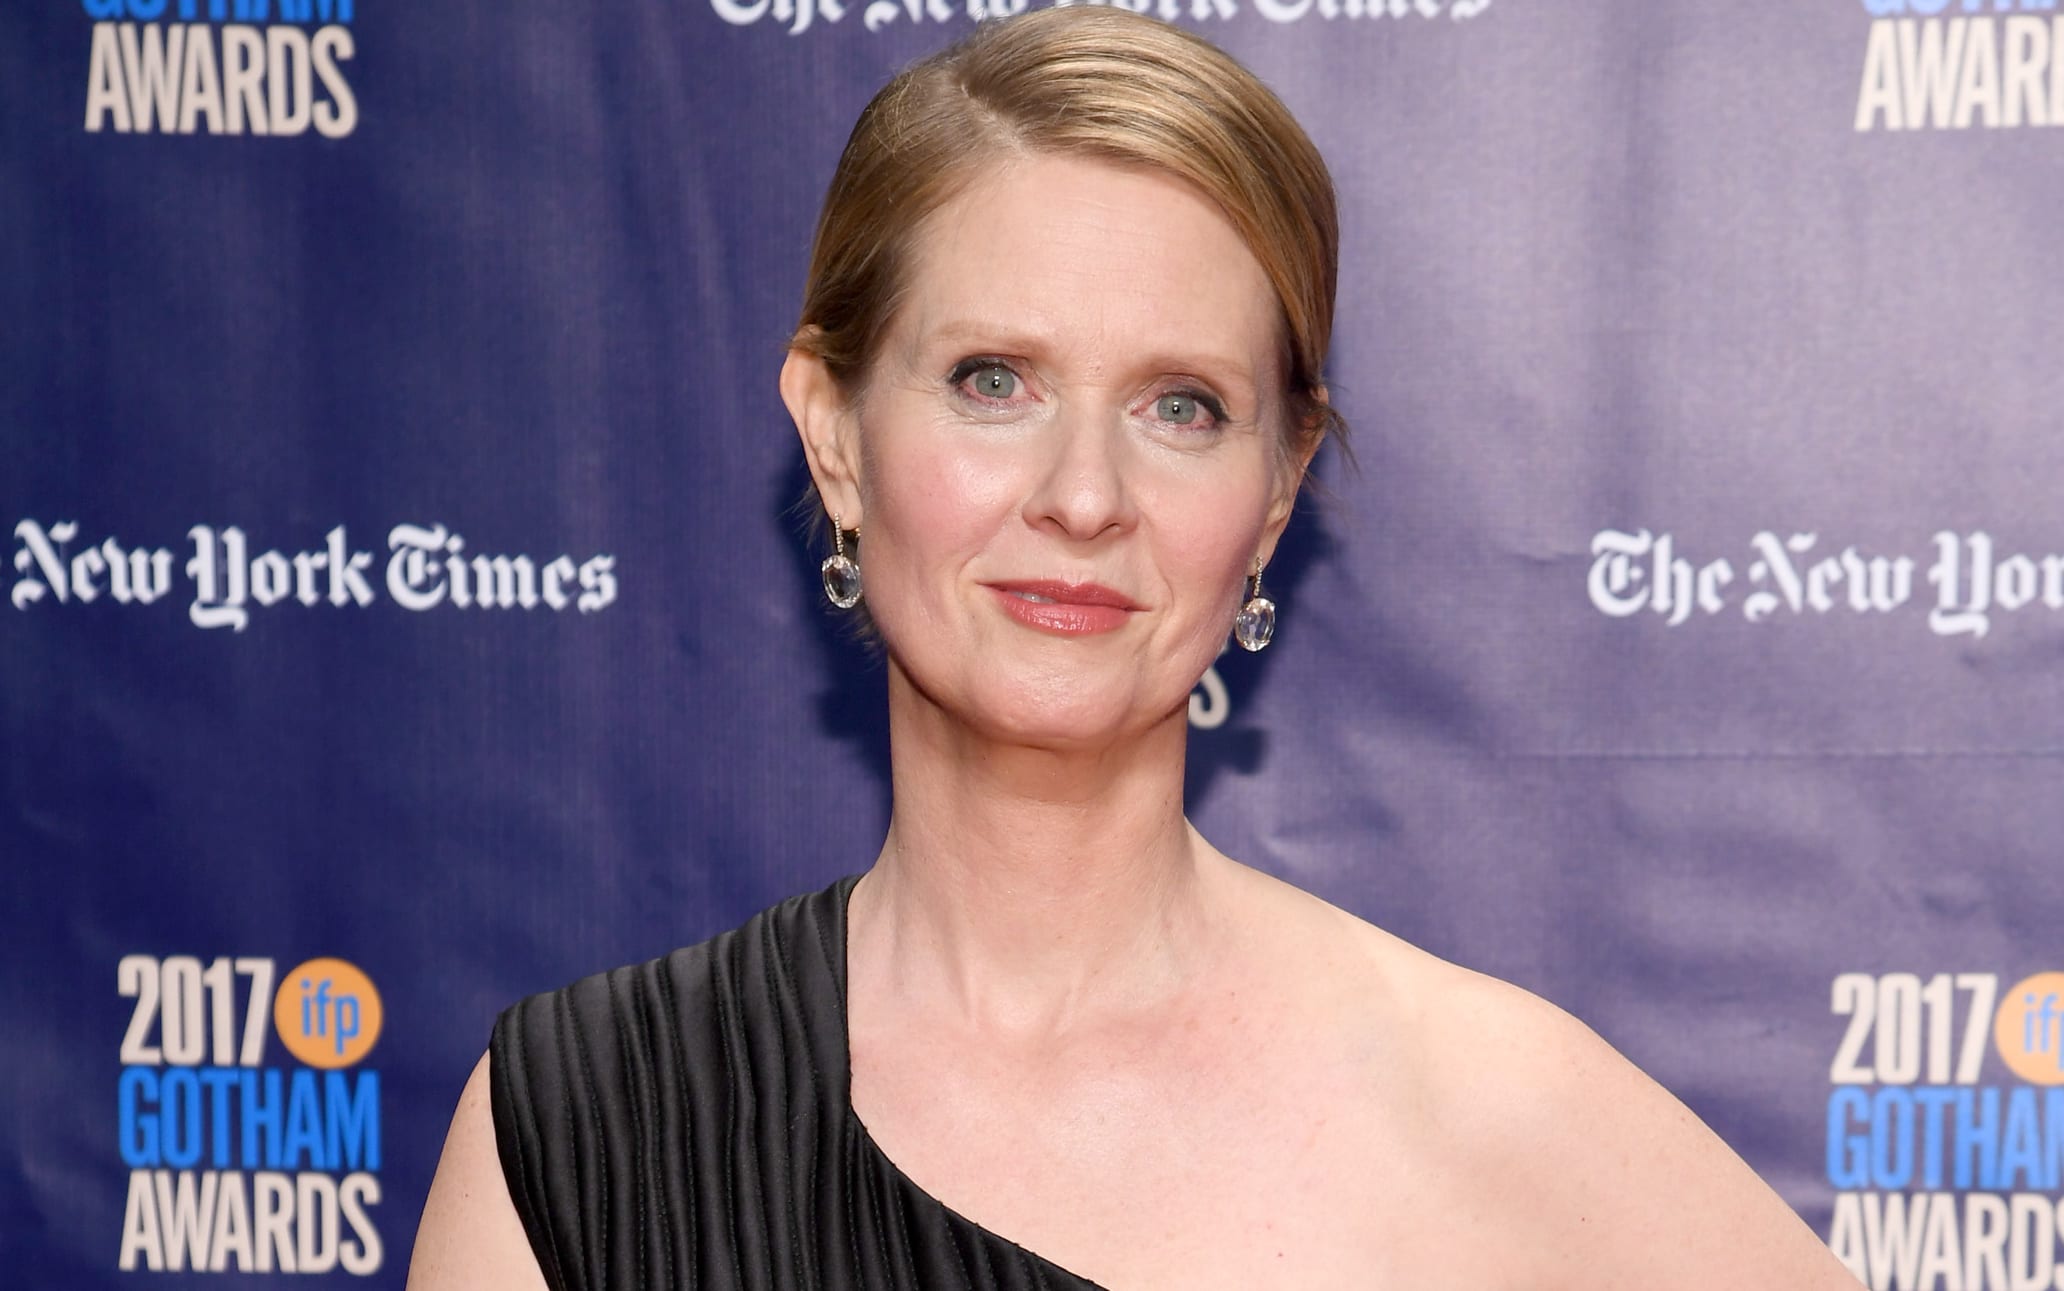 Actor Cynthia Nixon attends IFP's 27th Annual Gotham Independent Film Awards on November 27, 2017 in New York City.